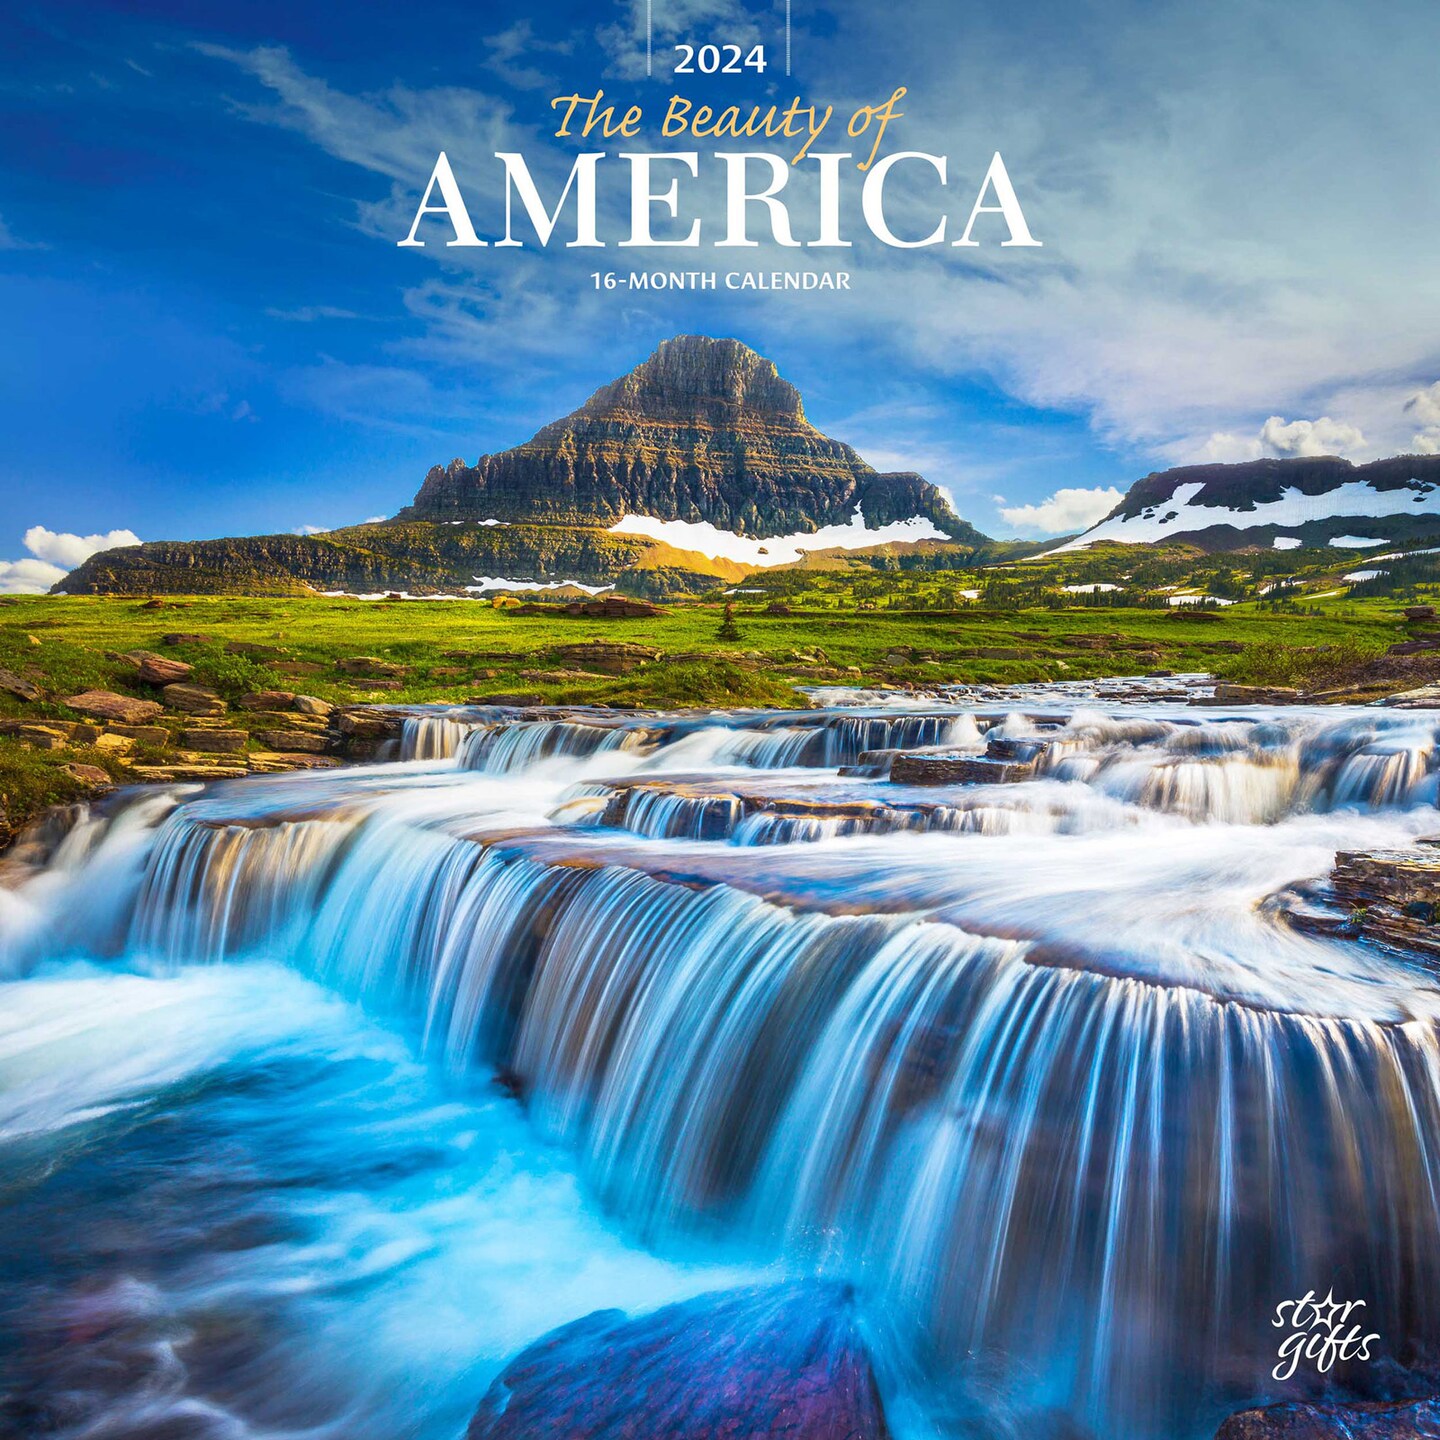 The Beauty of America | 2024 12 x 24 Inch Monthly Square Wall Calendar | Sticker Sheet | StarGifts | USA United States Scenic Nature